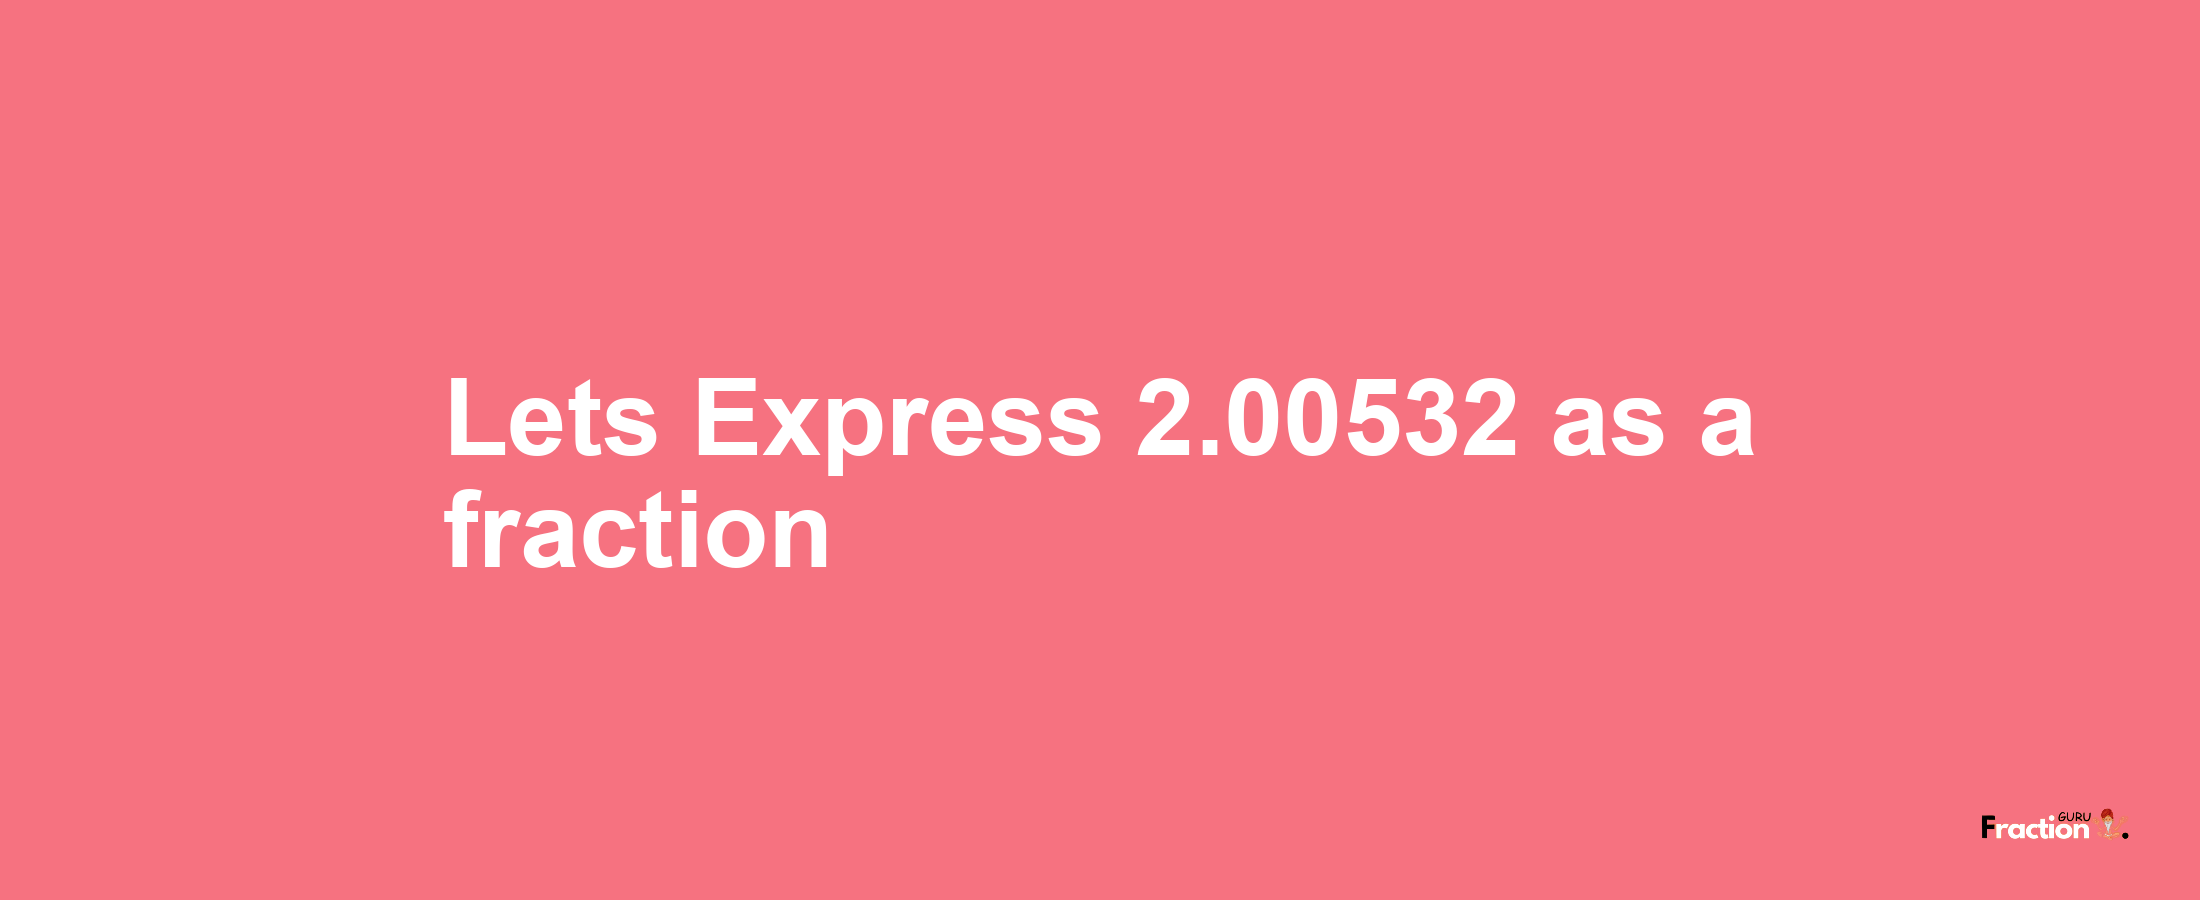 Lets Express 2.00532 as afraction